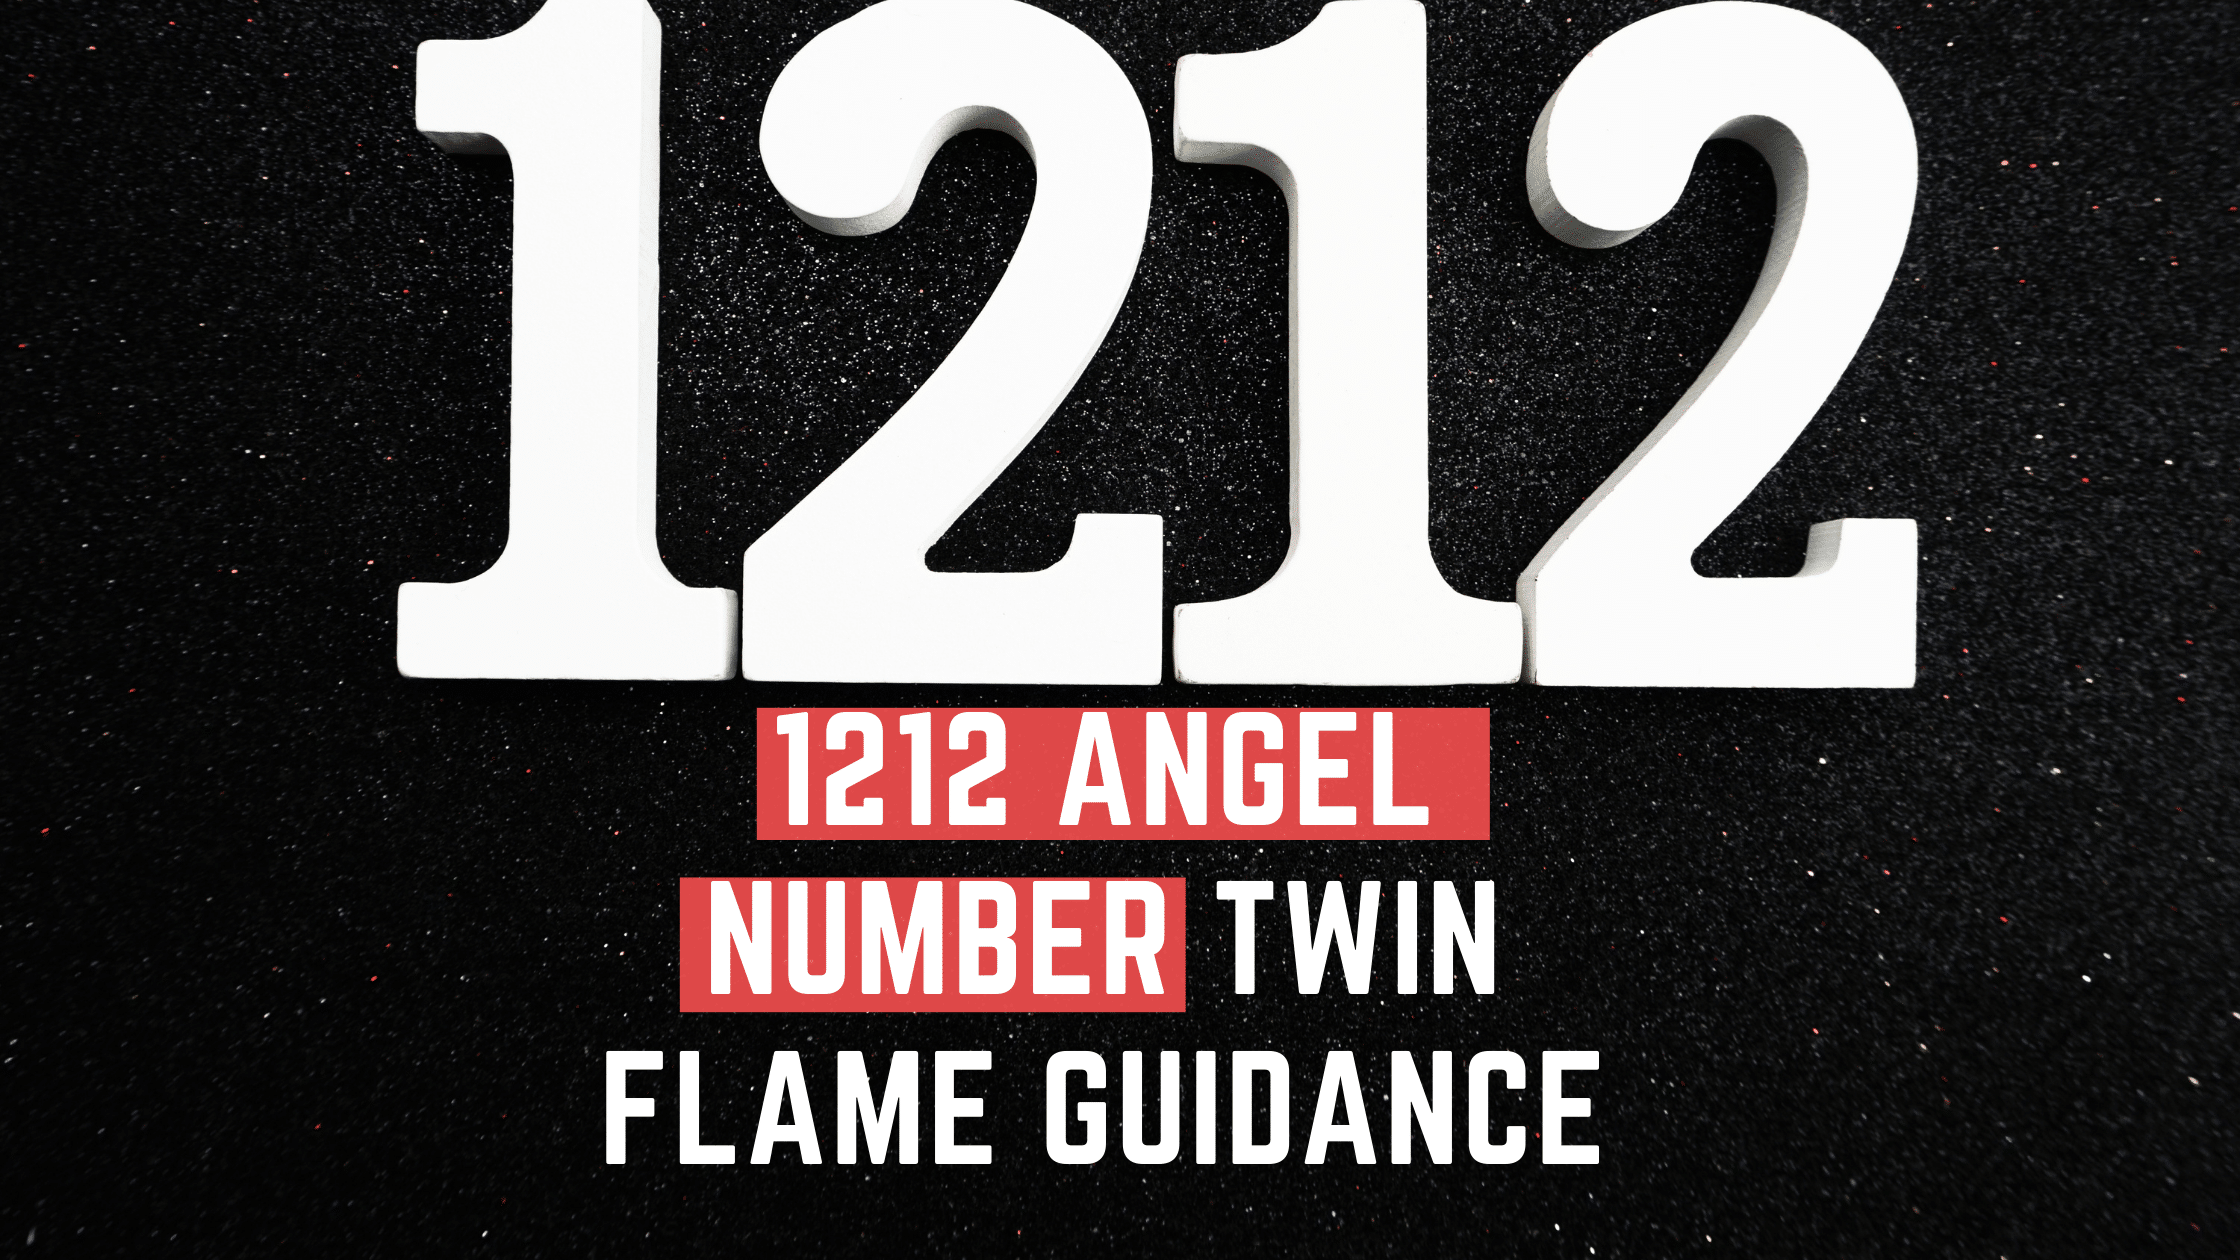 642 angel number twin flame